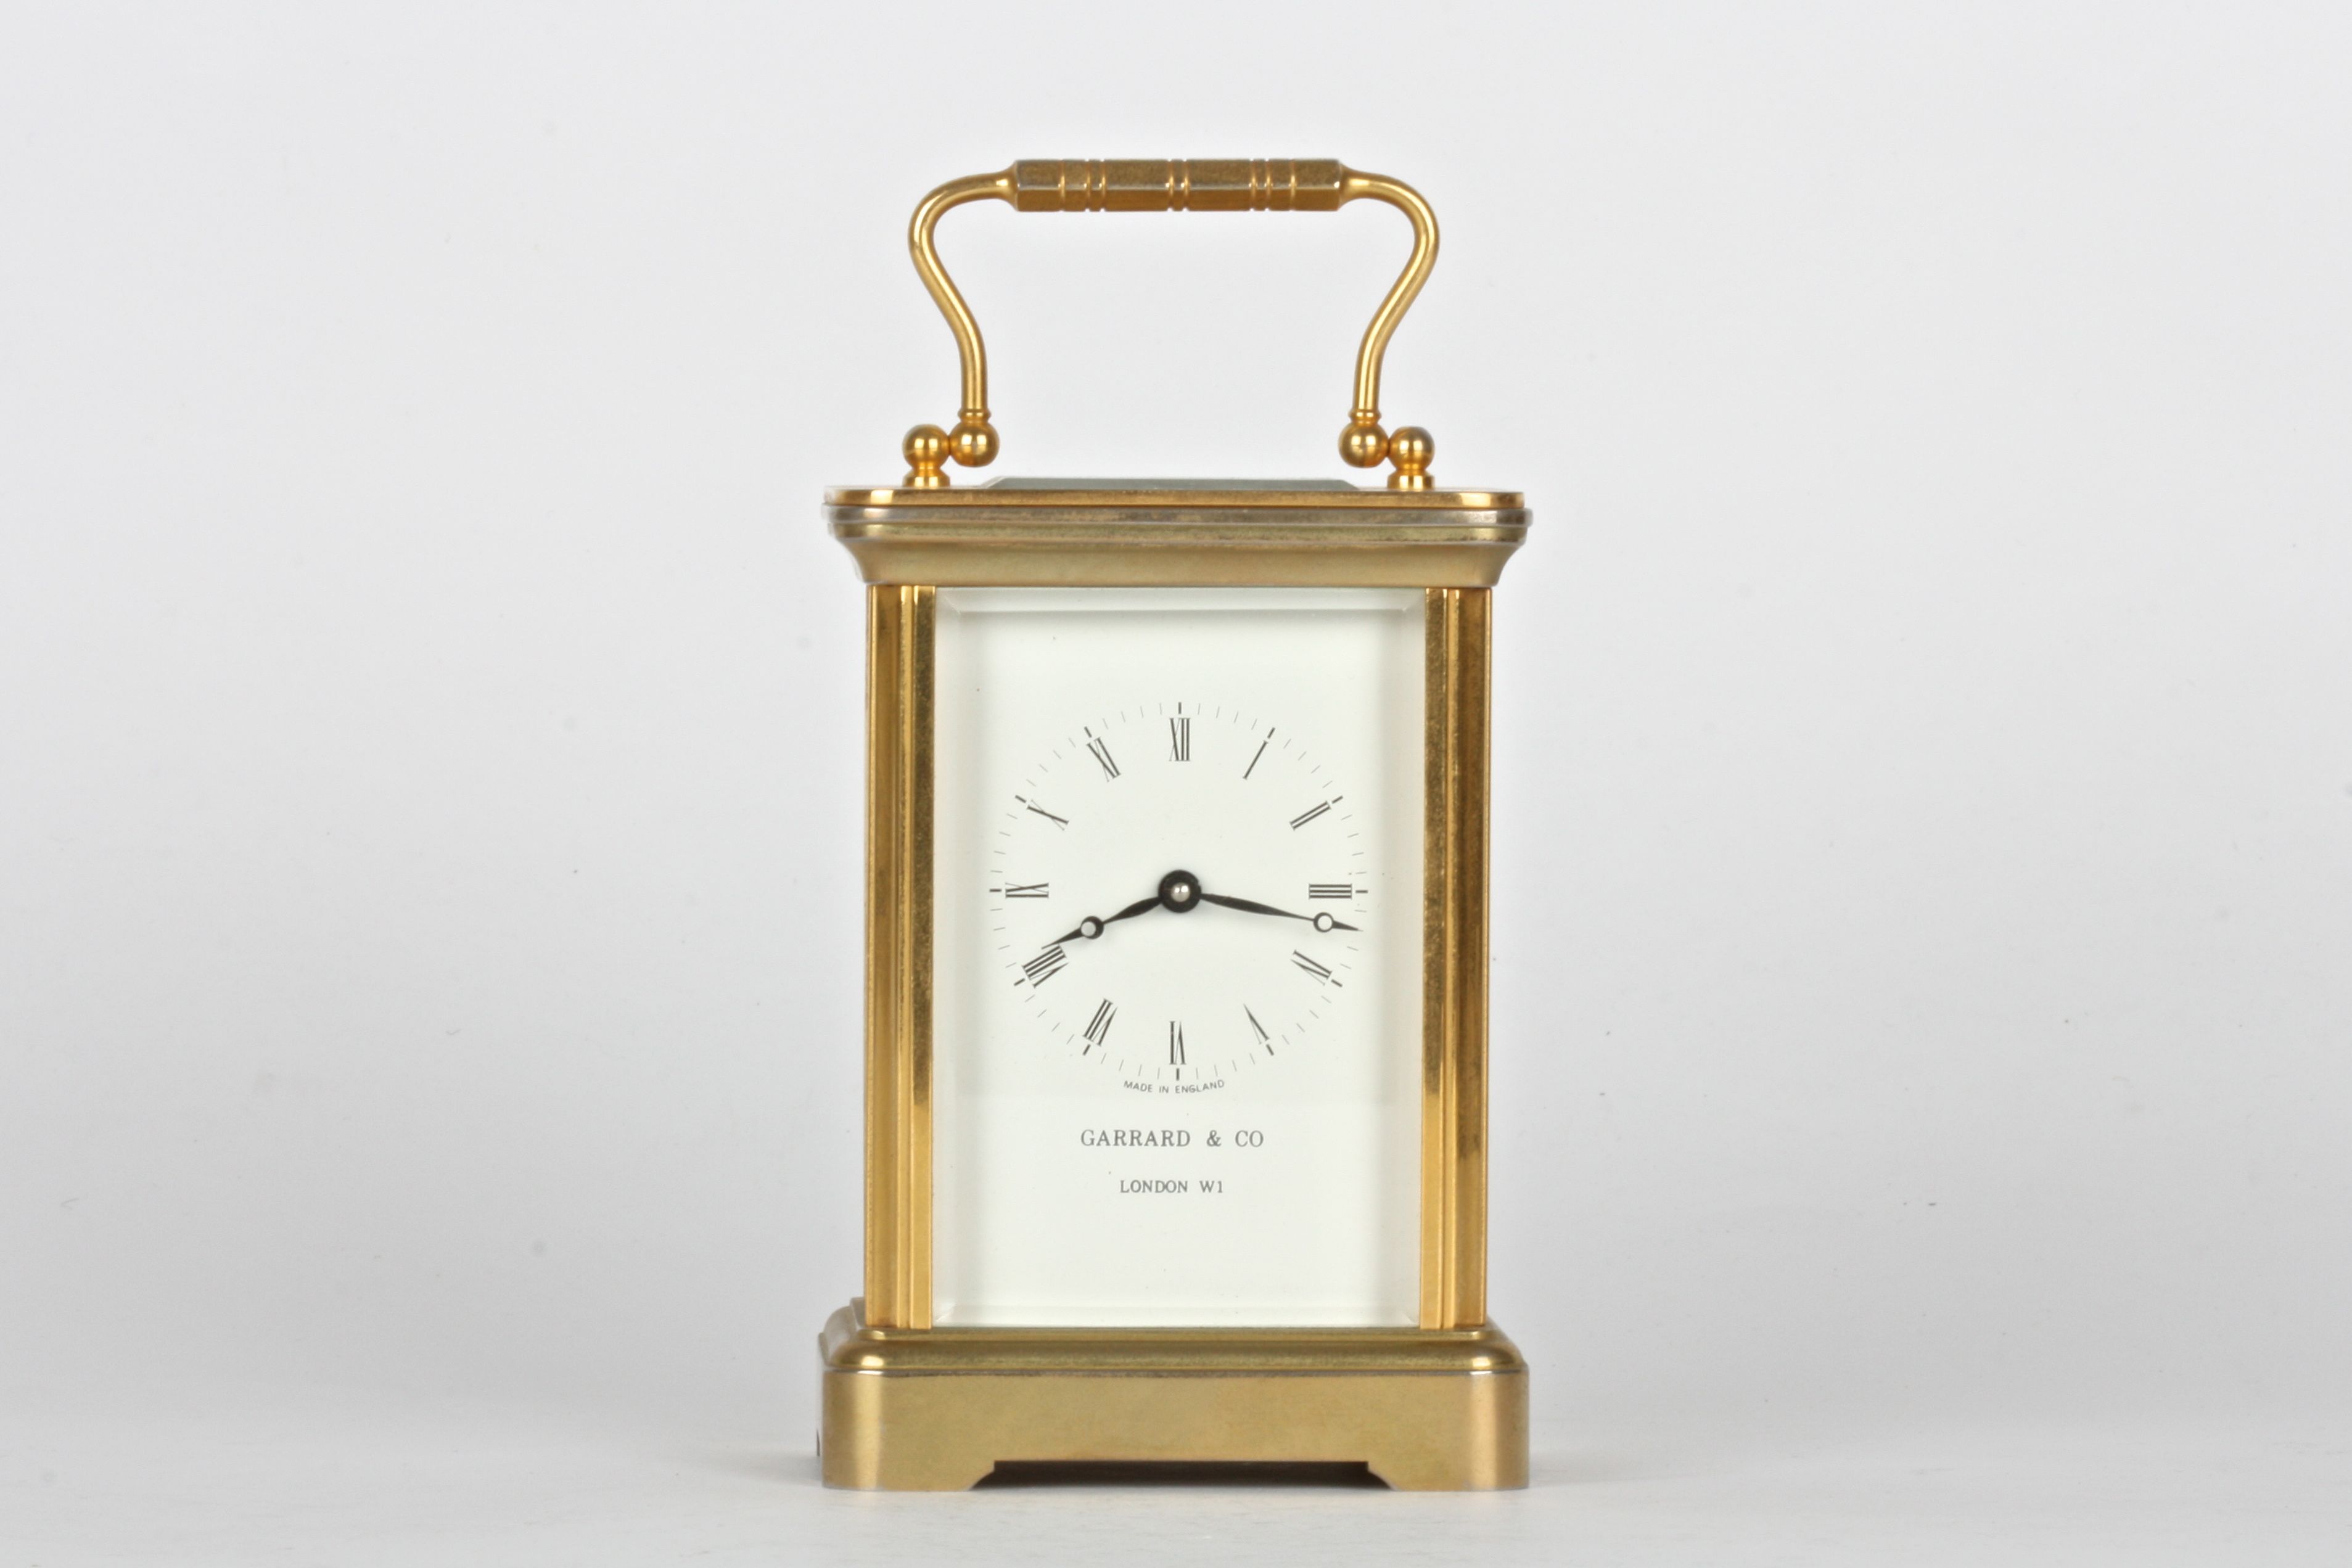 A 20th century Garrard & Co. brass carriage clock
with white dial and black Roman numerals, the dial